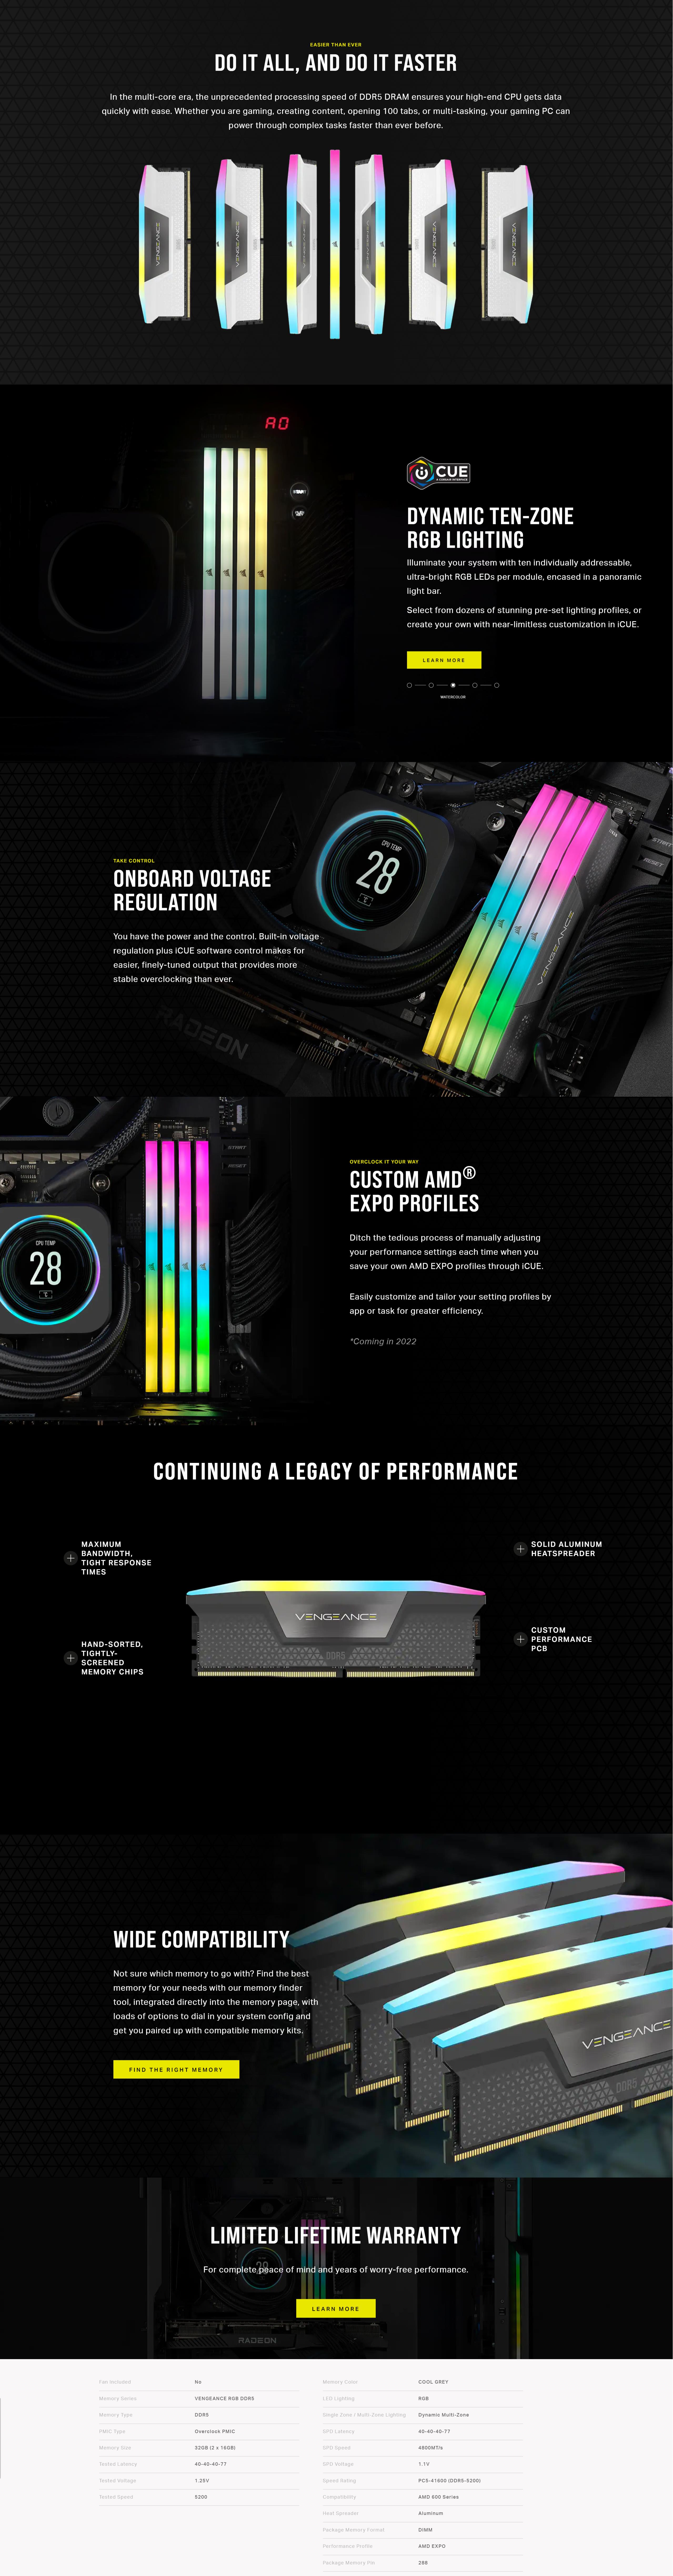 A large marketing image providing additional information about the product Corsair 32GB Kit (2x16GB) DDR5 Vengeance RGB AMD EXPO C40 5200MT/s - Cool Grey - Additional alt info not provided